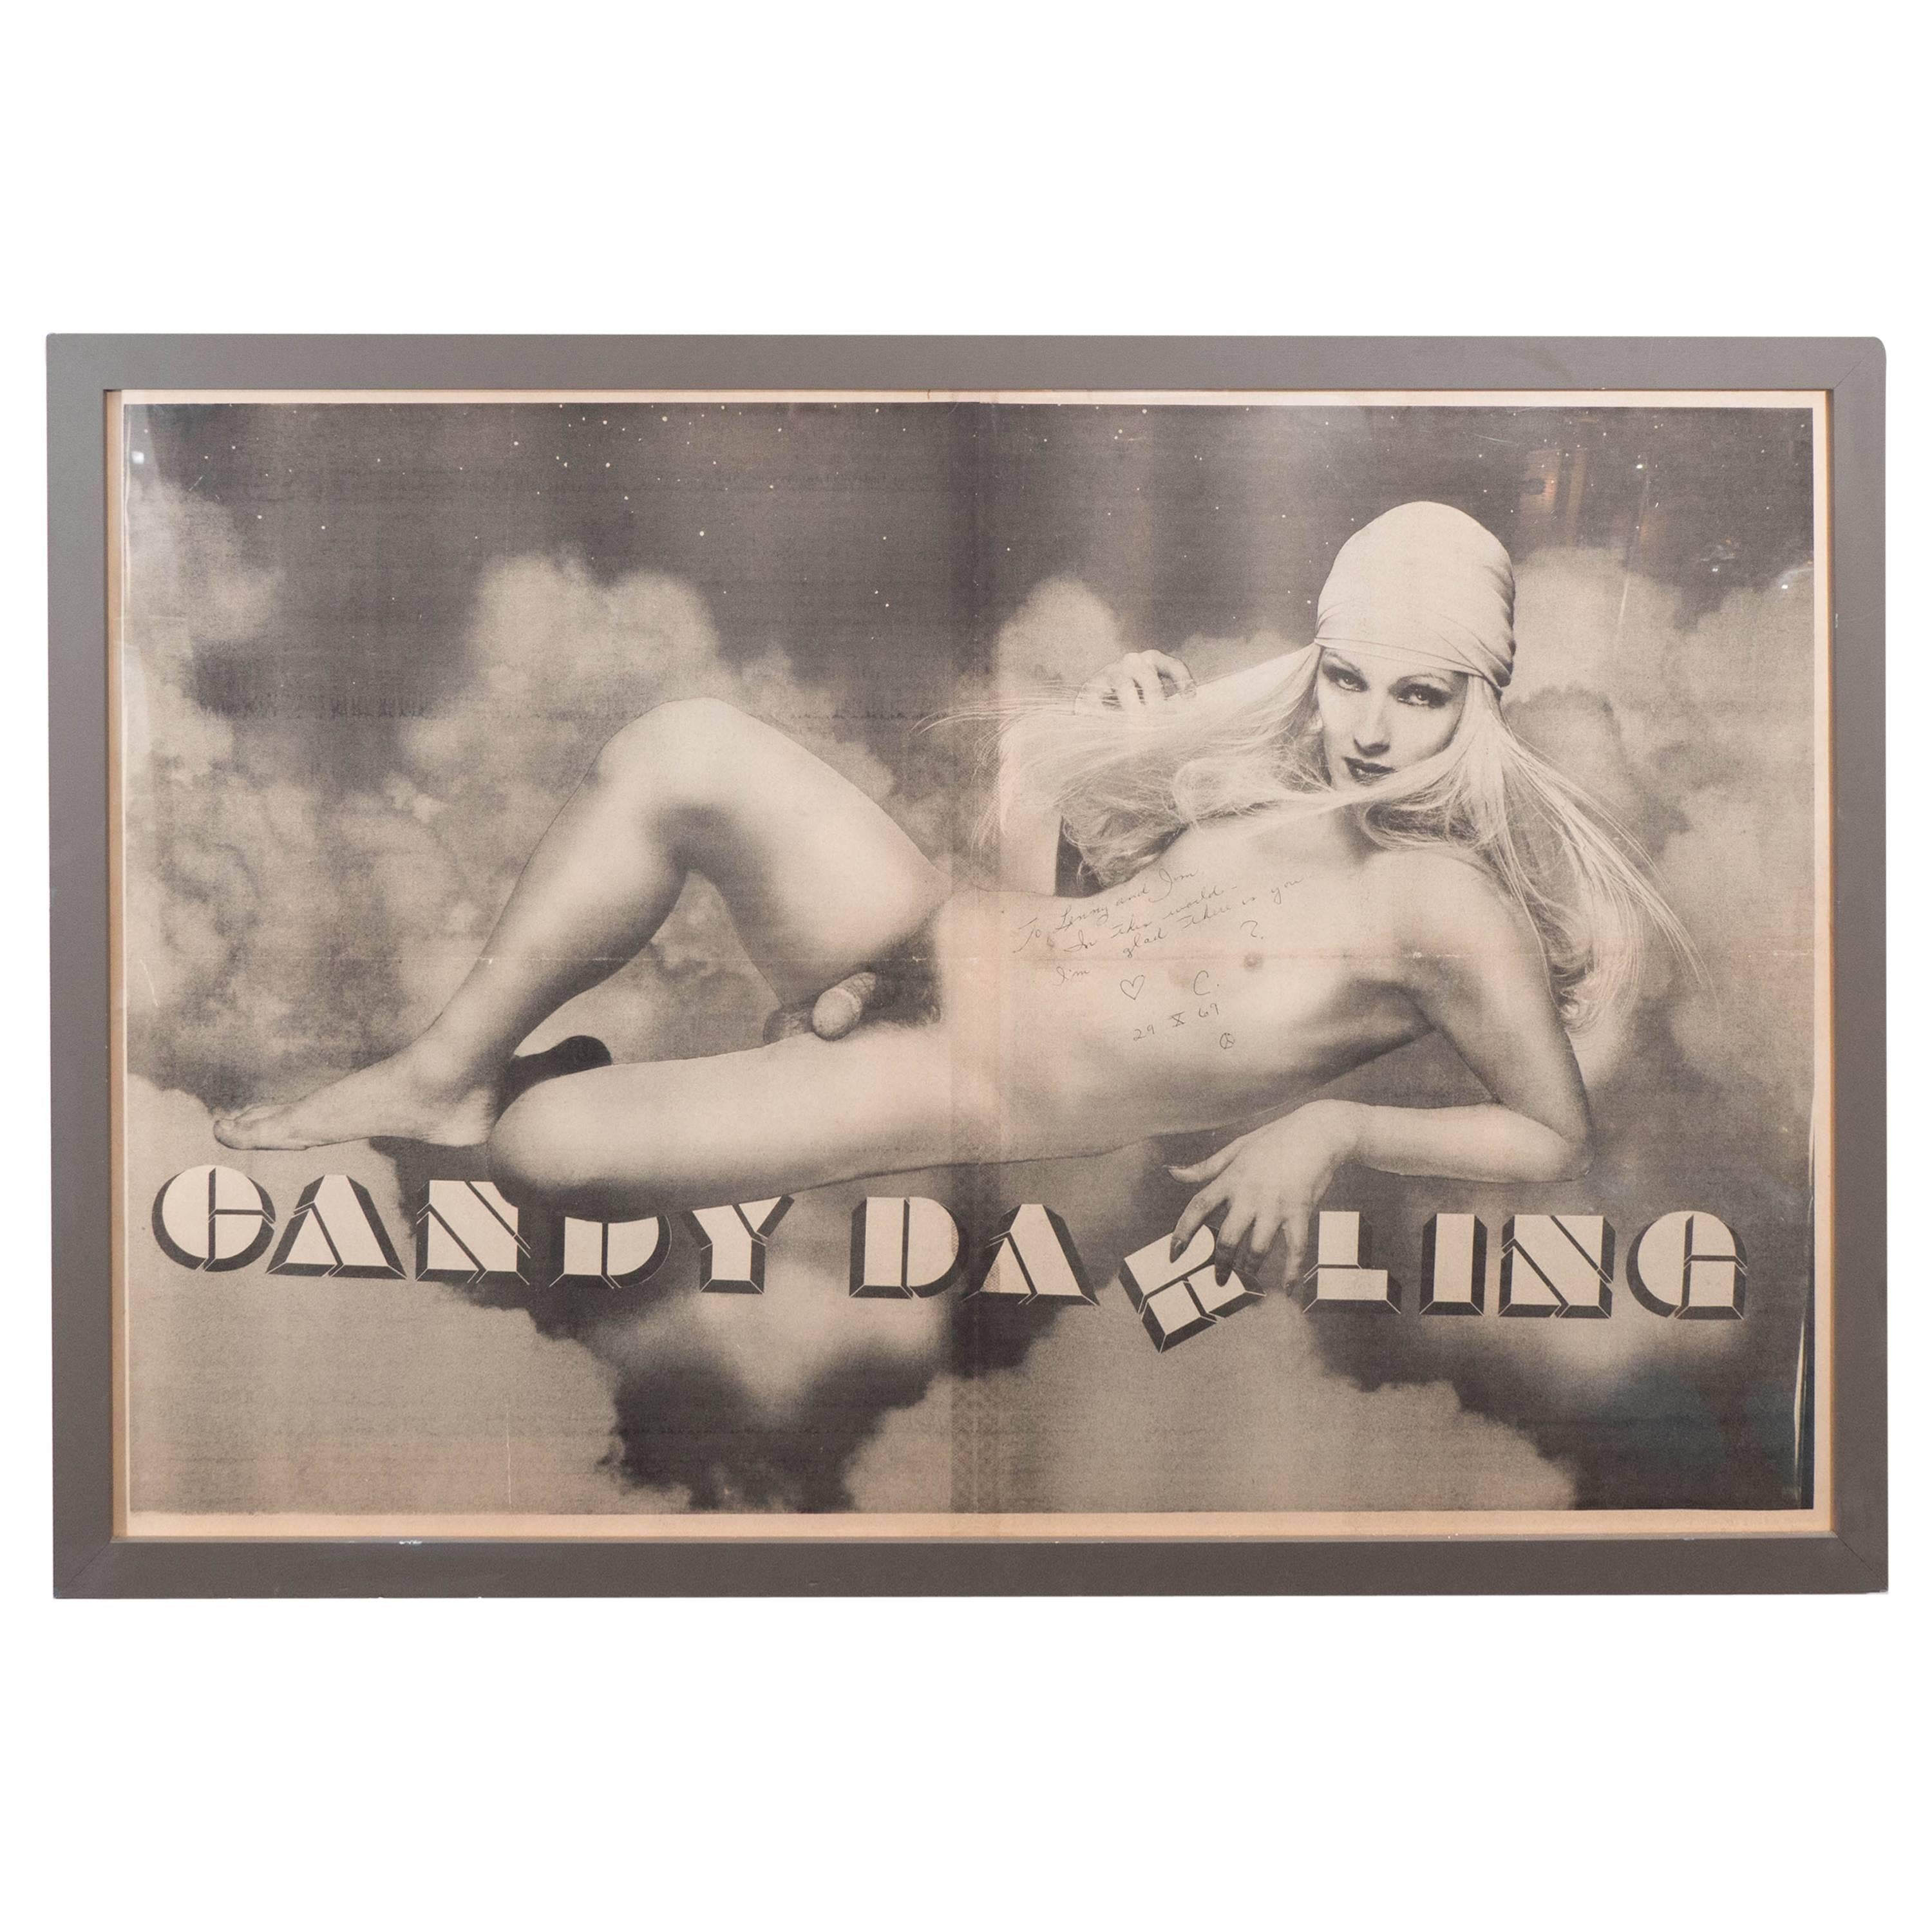 Autographed Poster of Candy Darling